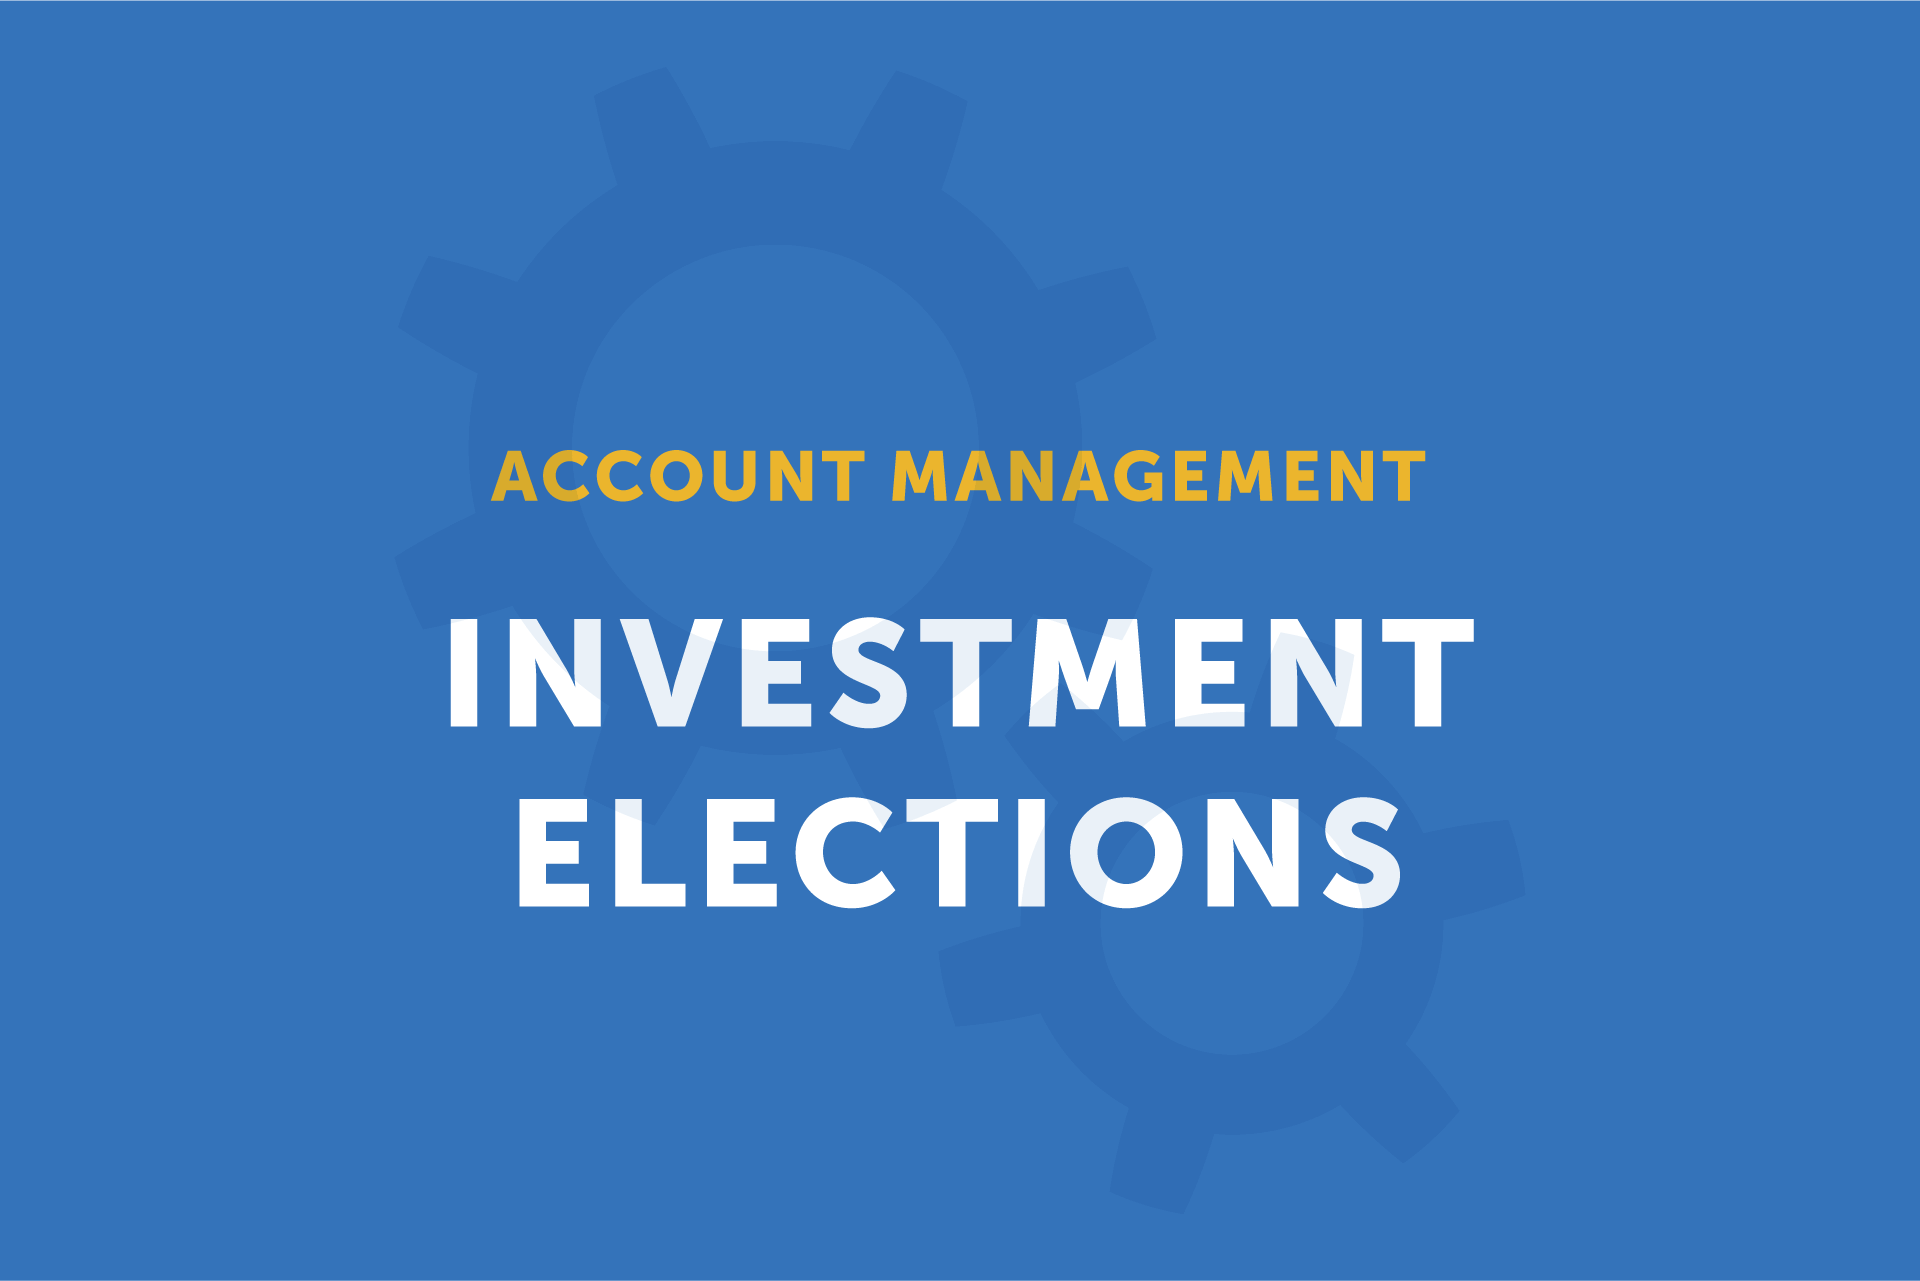 Investment Elections